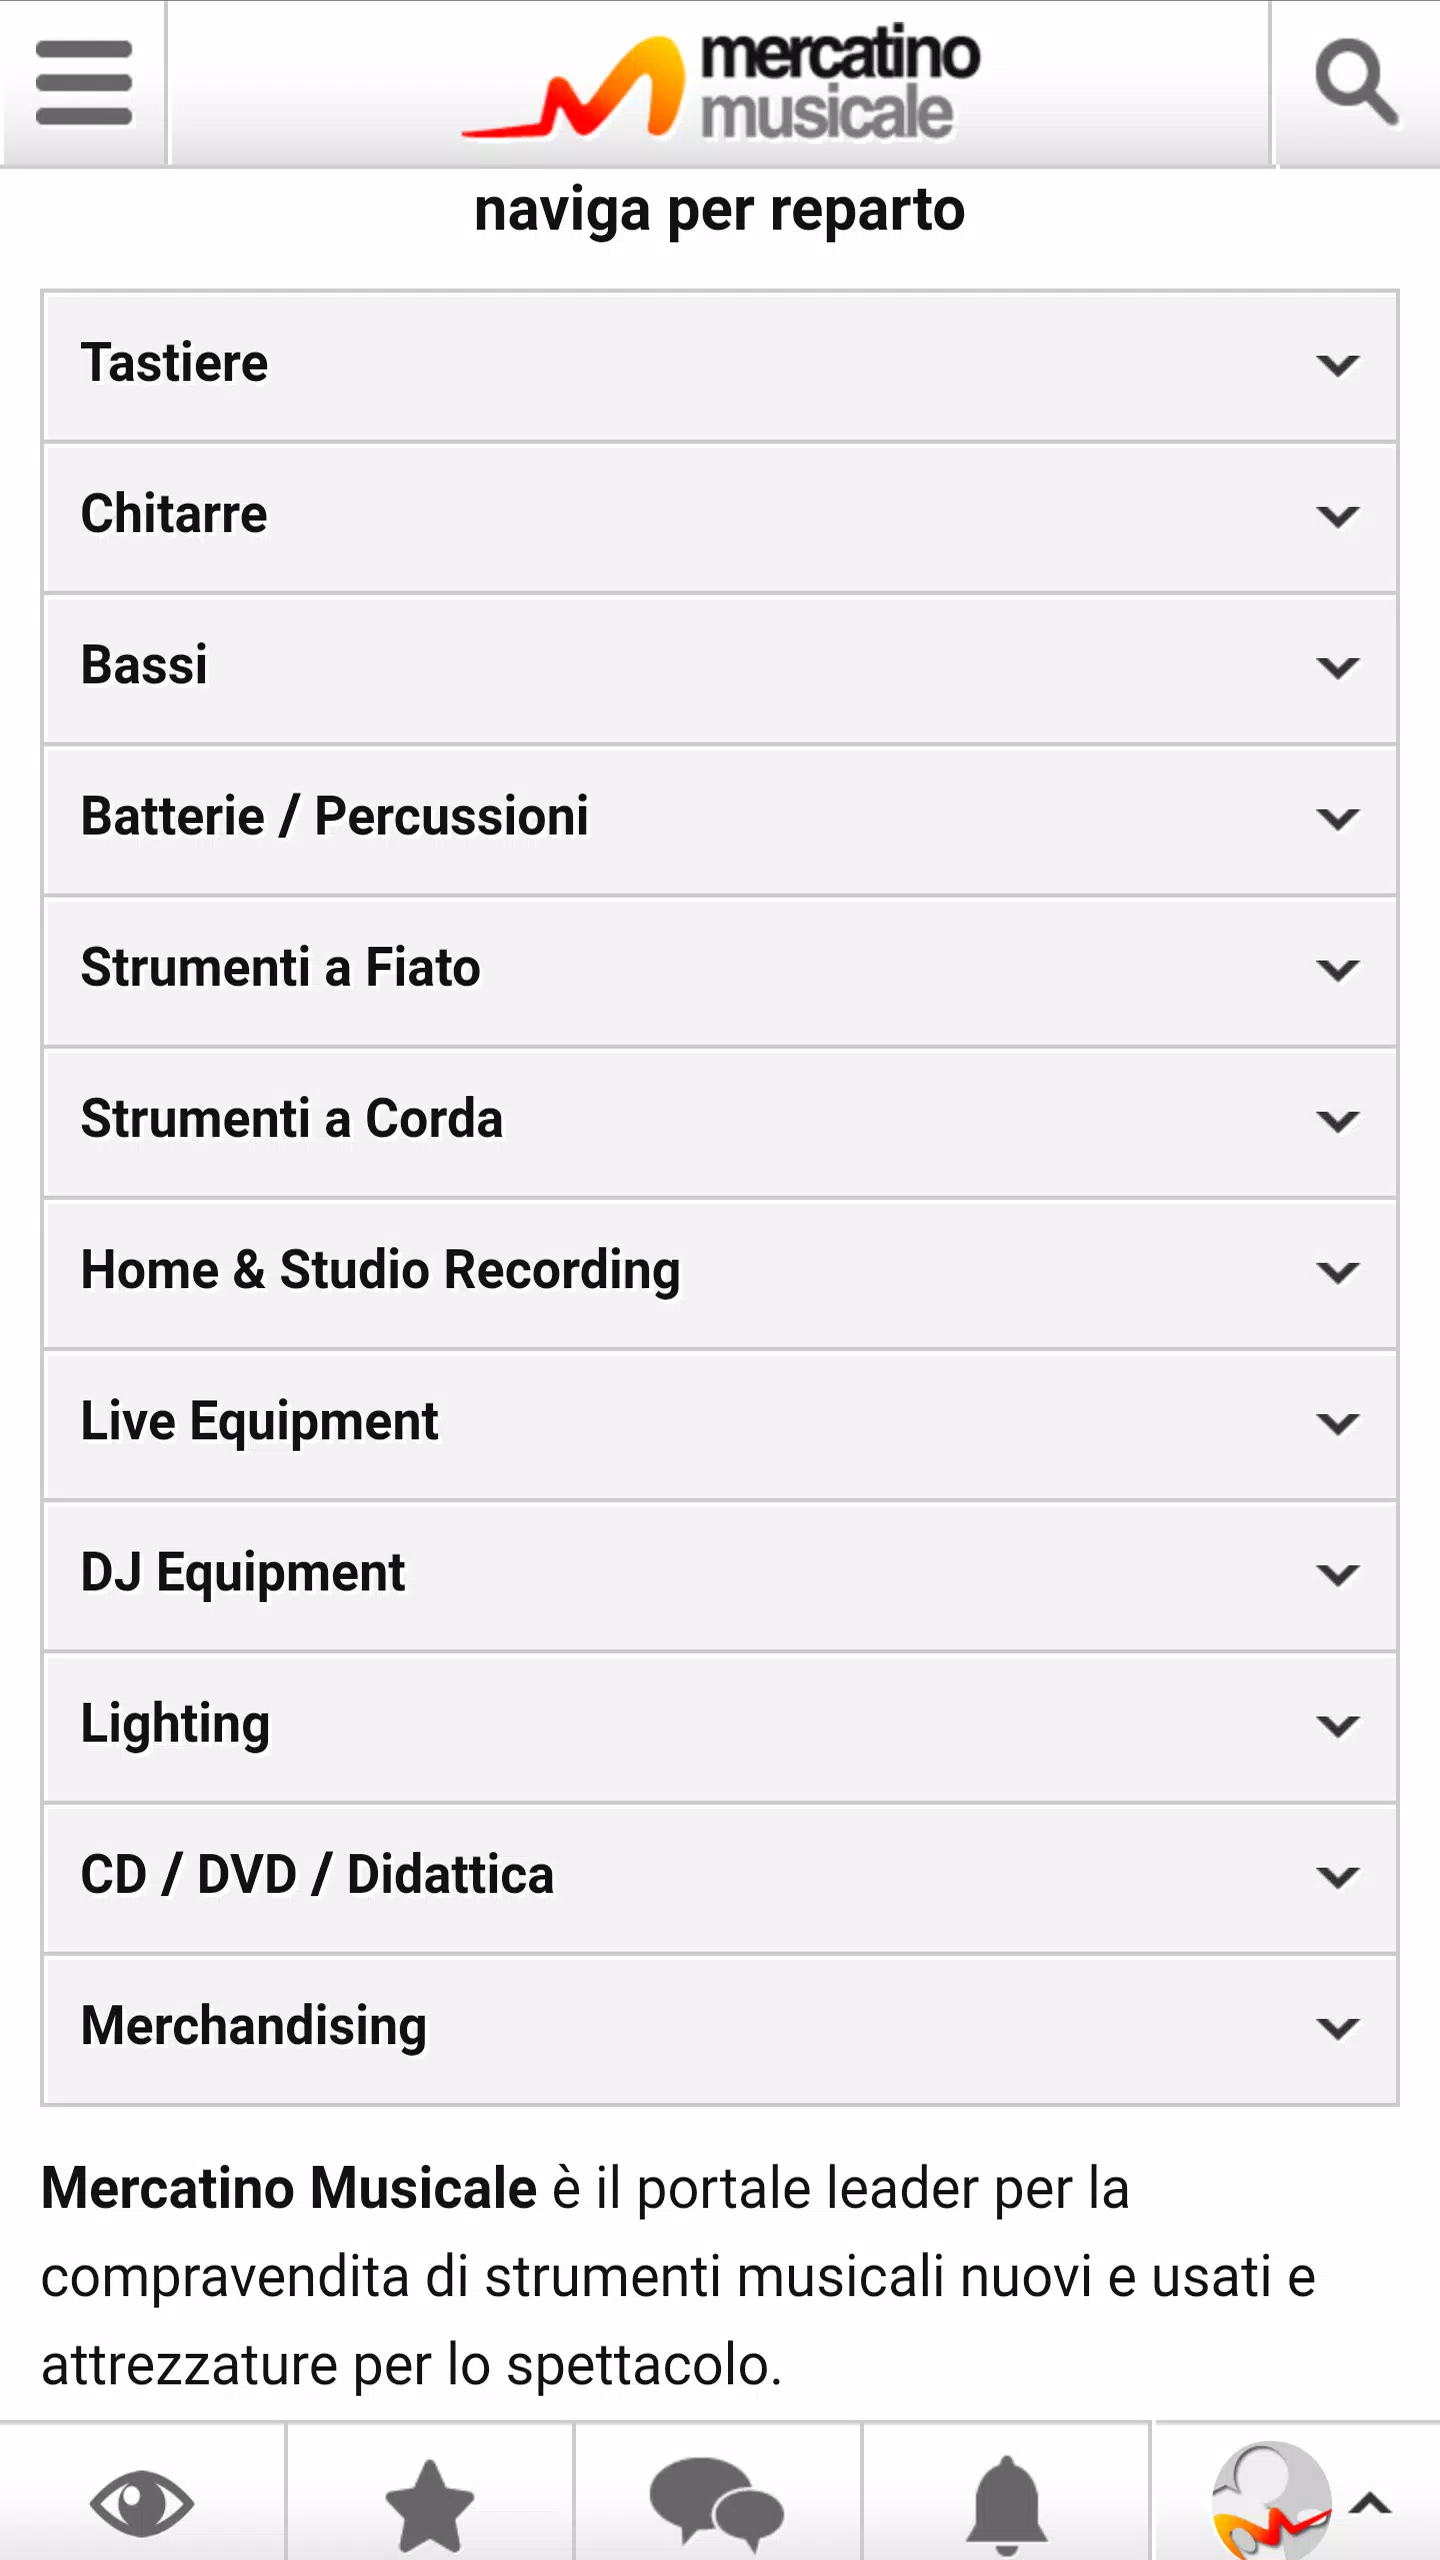 Mercatino Musicale for Android - APK Download